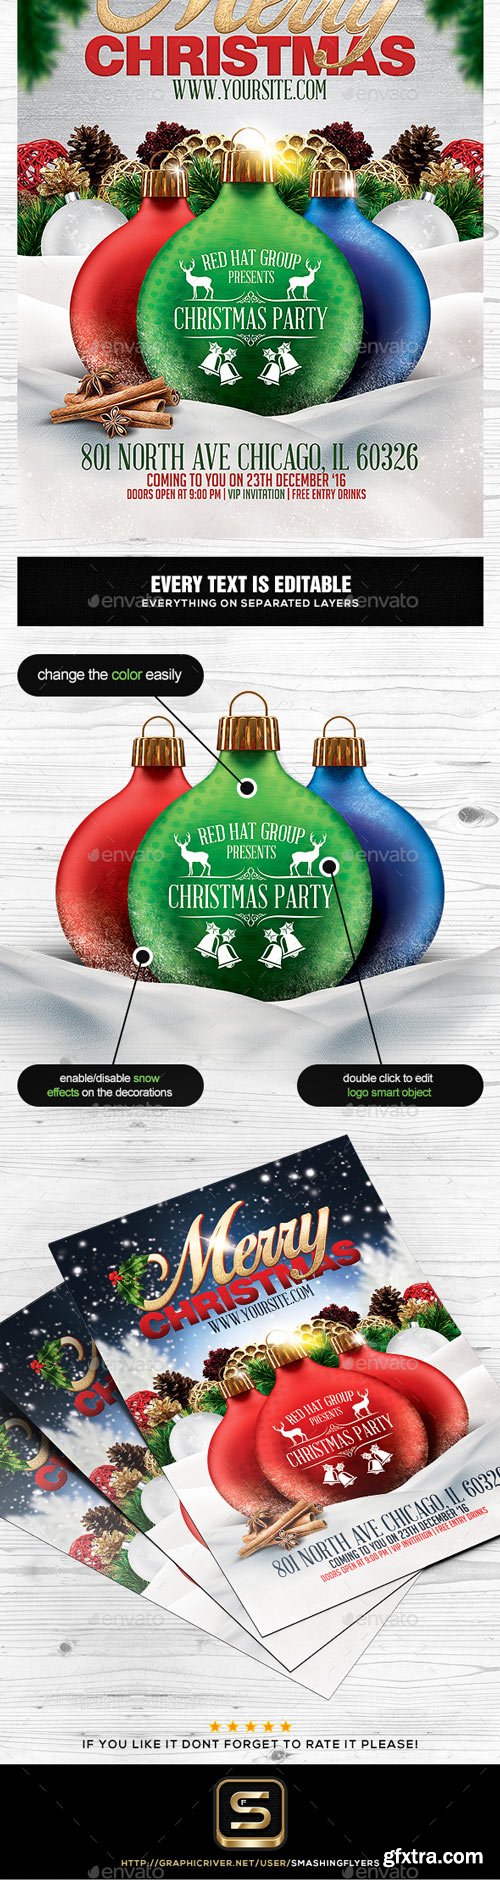 GraphicRiver - Christmas Party Flyer Template - 18898331